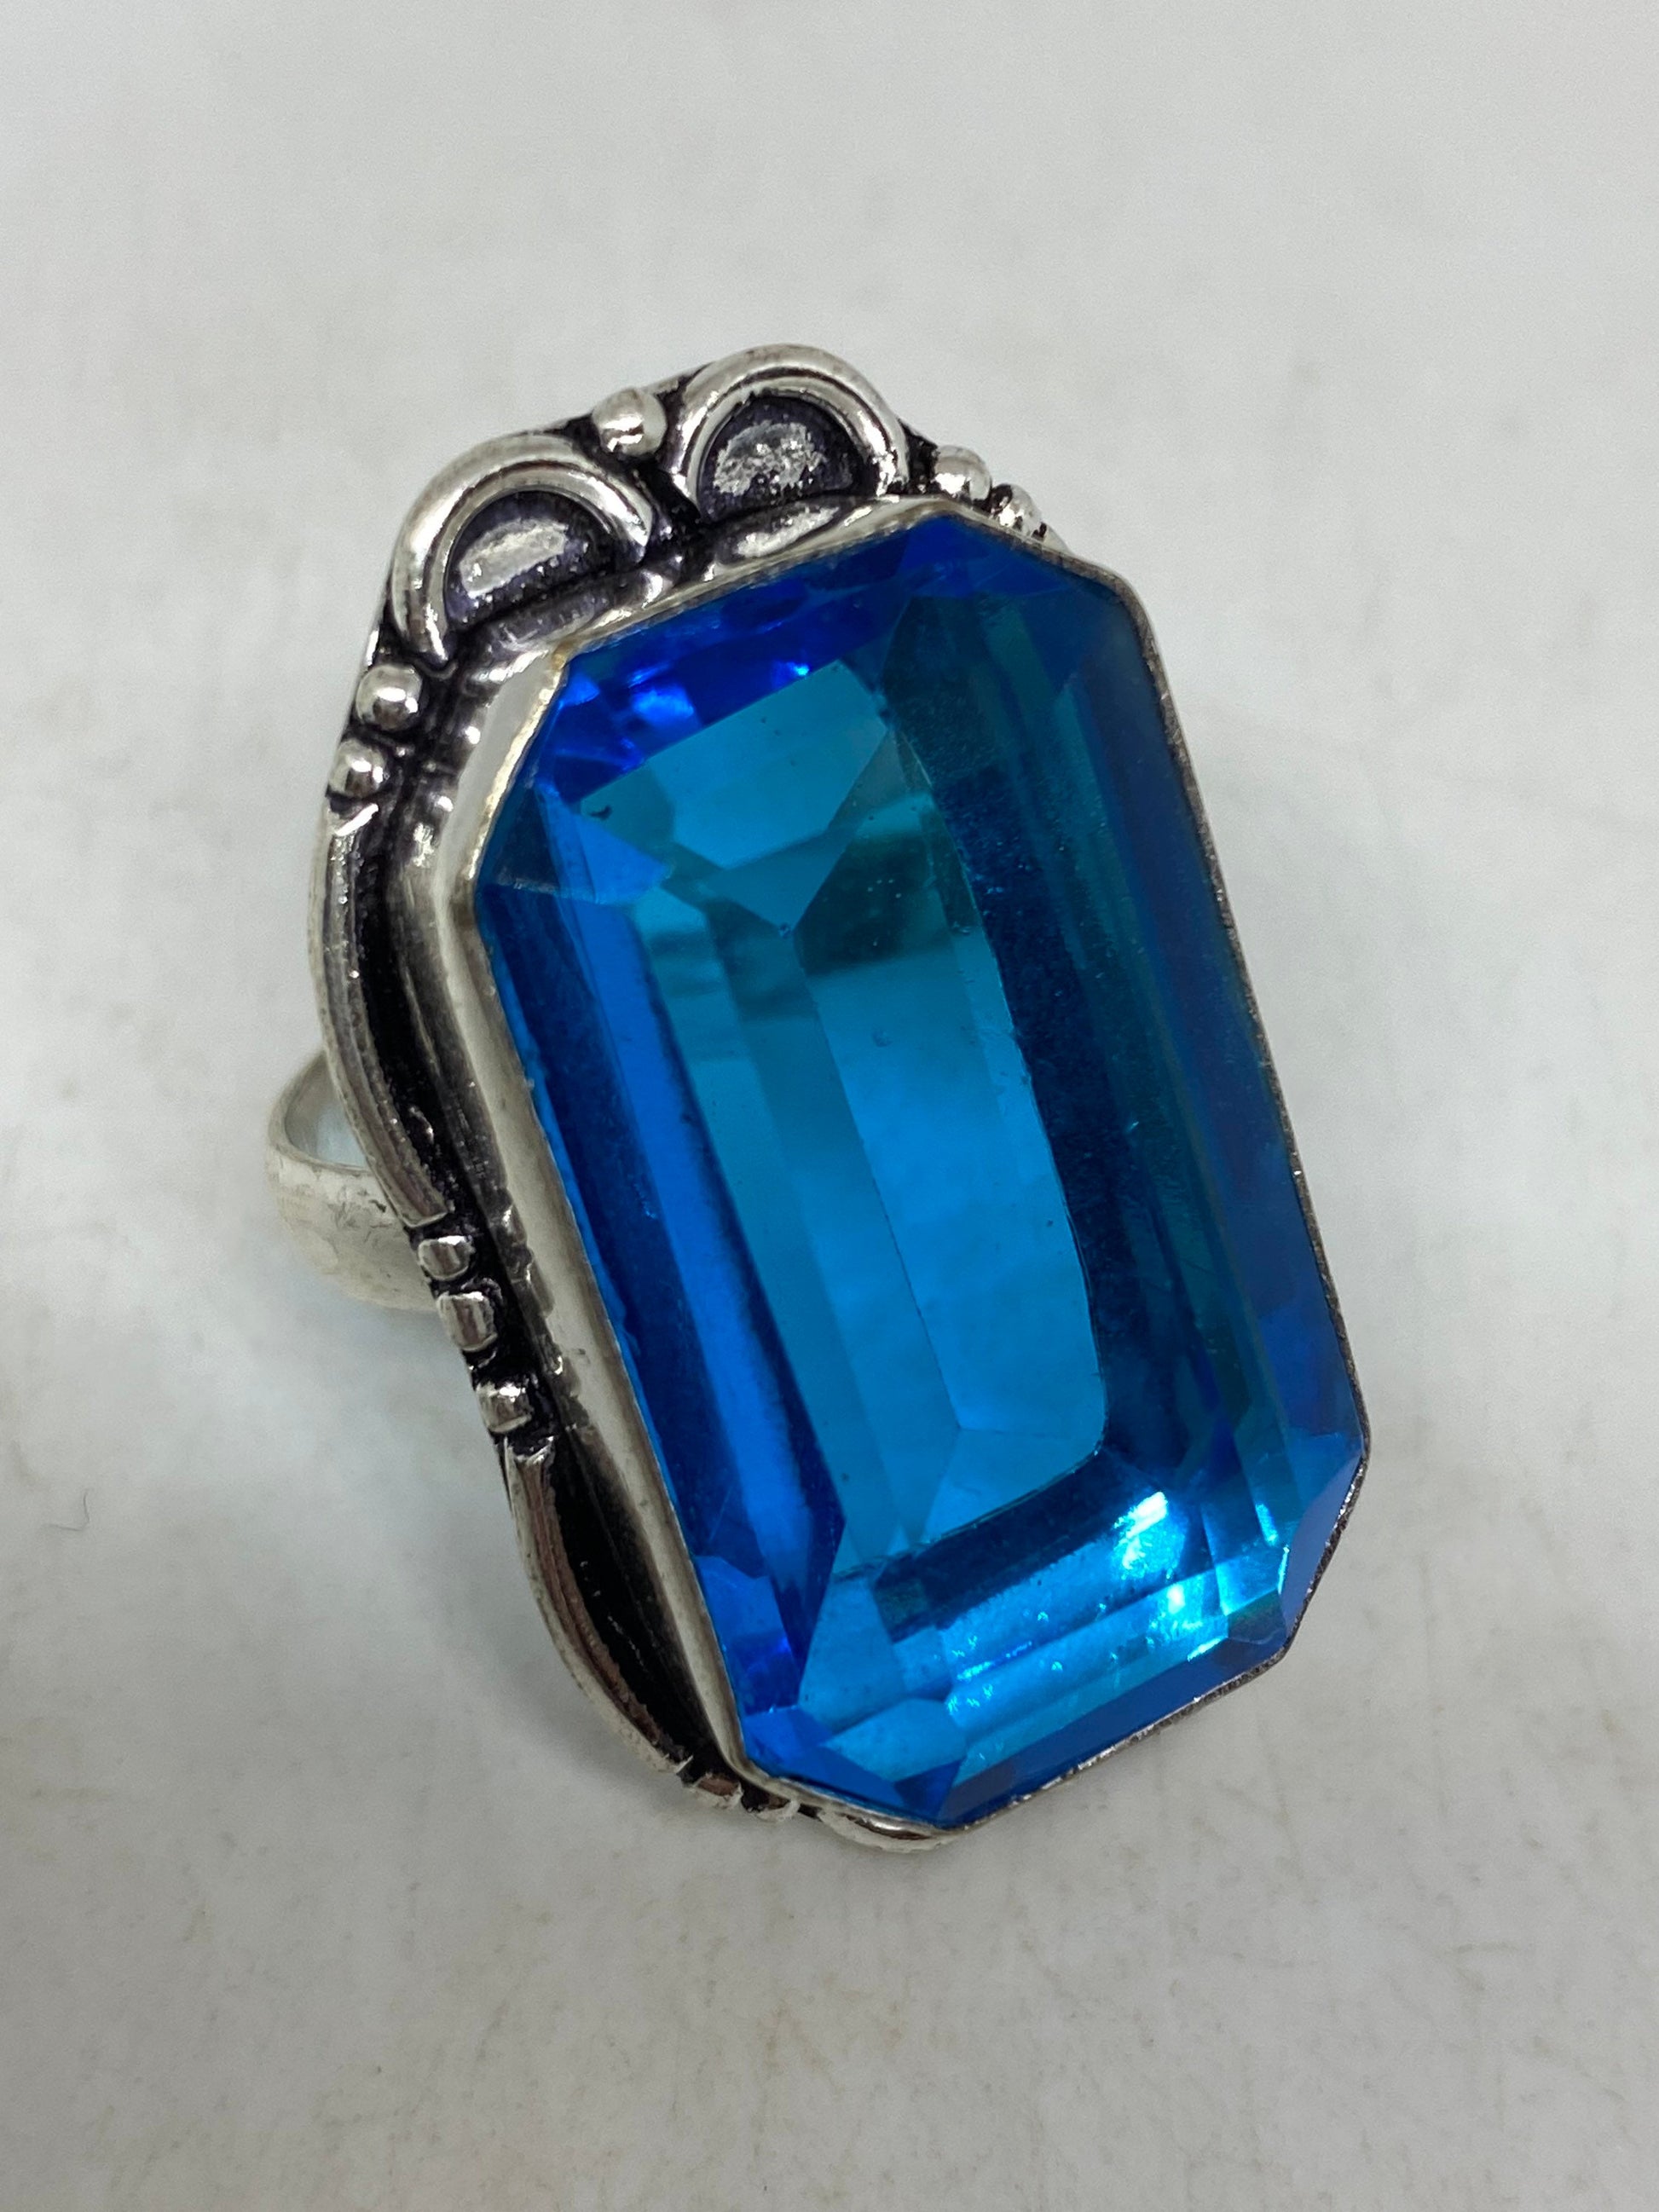 Vintage Aqua Vintage Art Glass Ring About 1 Inch Knuckle Ring